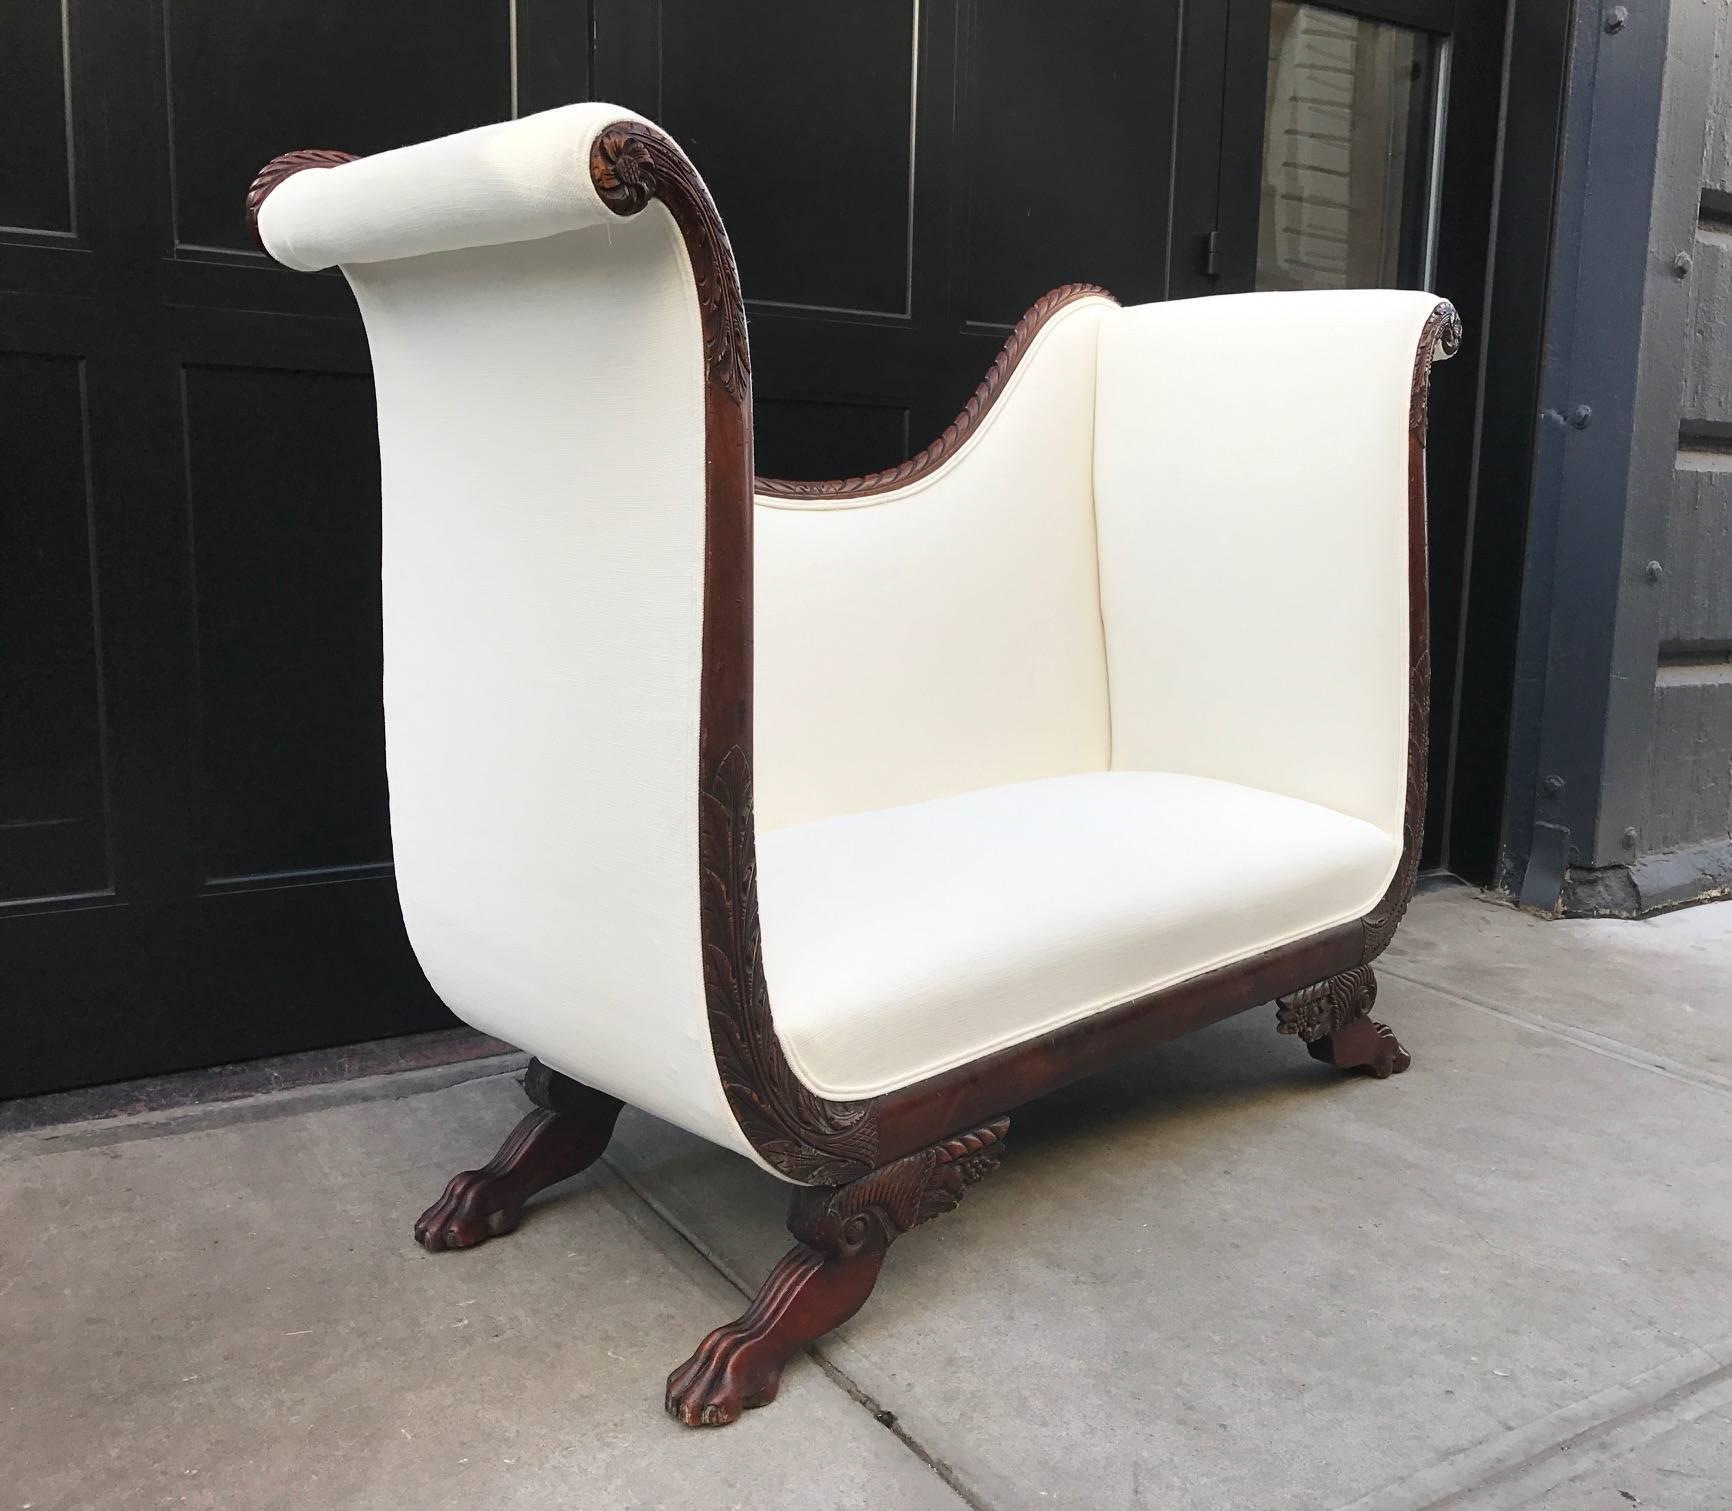 Empire style tall back loveseat with carved mahogany base and claw feet. Newly upholstered in off-white fabric.